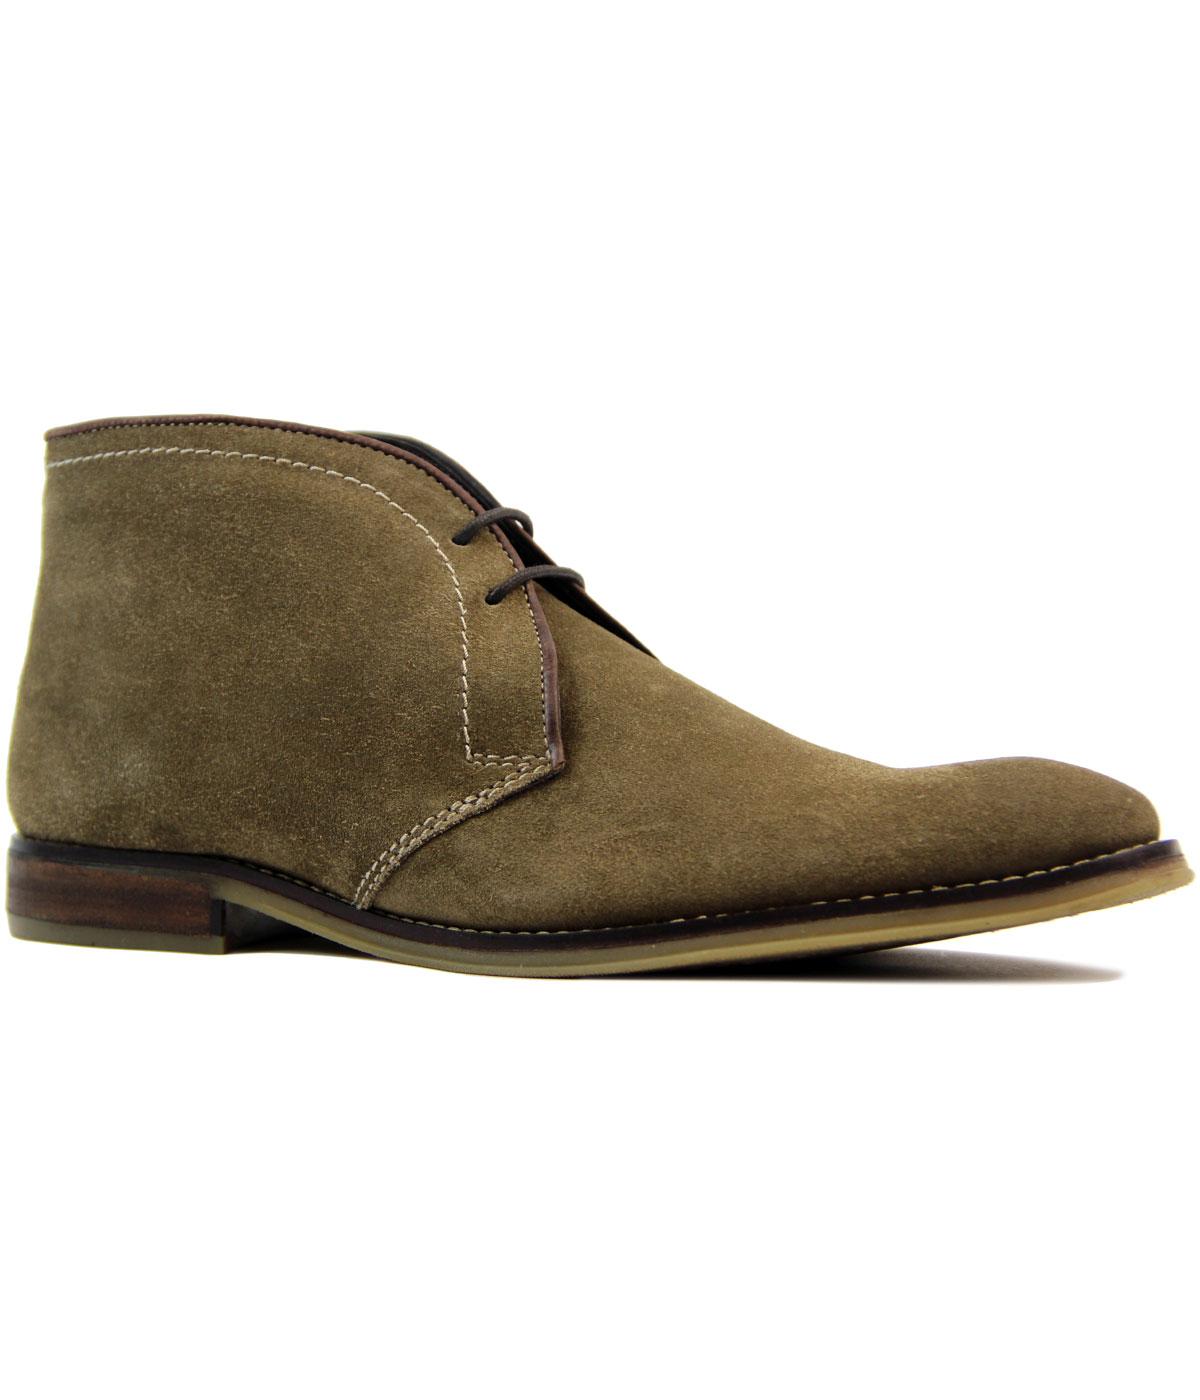 IKON Newton Retro 1960s Mod Suede Piped Trim Desert Boots Taupe